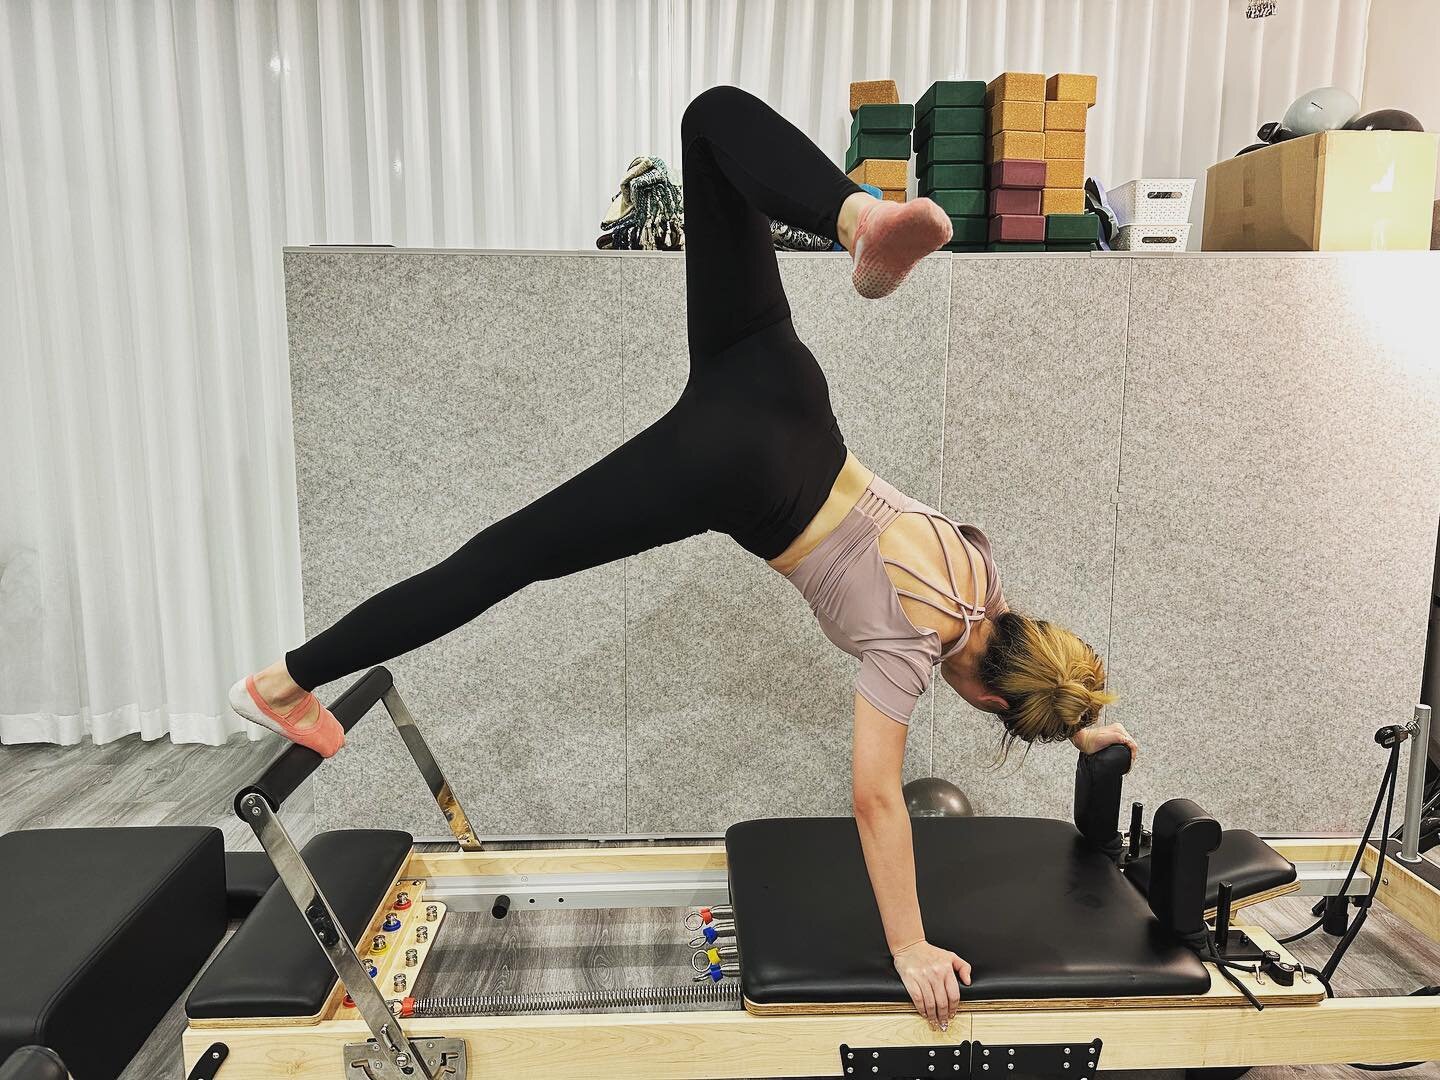 Snake flip-over 🐍  join cathy&rsquo;s reformer session next week! Small group class only( 3 people less)

To book: mindbody 🔍 Forest studio 

#reformer #pilates #pilatesreformer #pilateslovers #reformerstudio